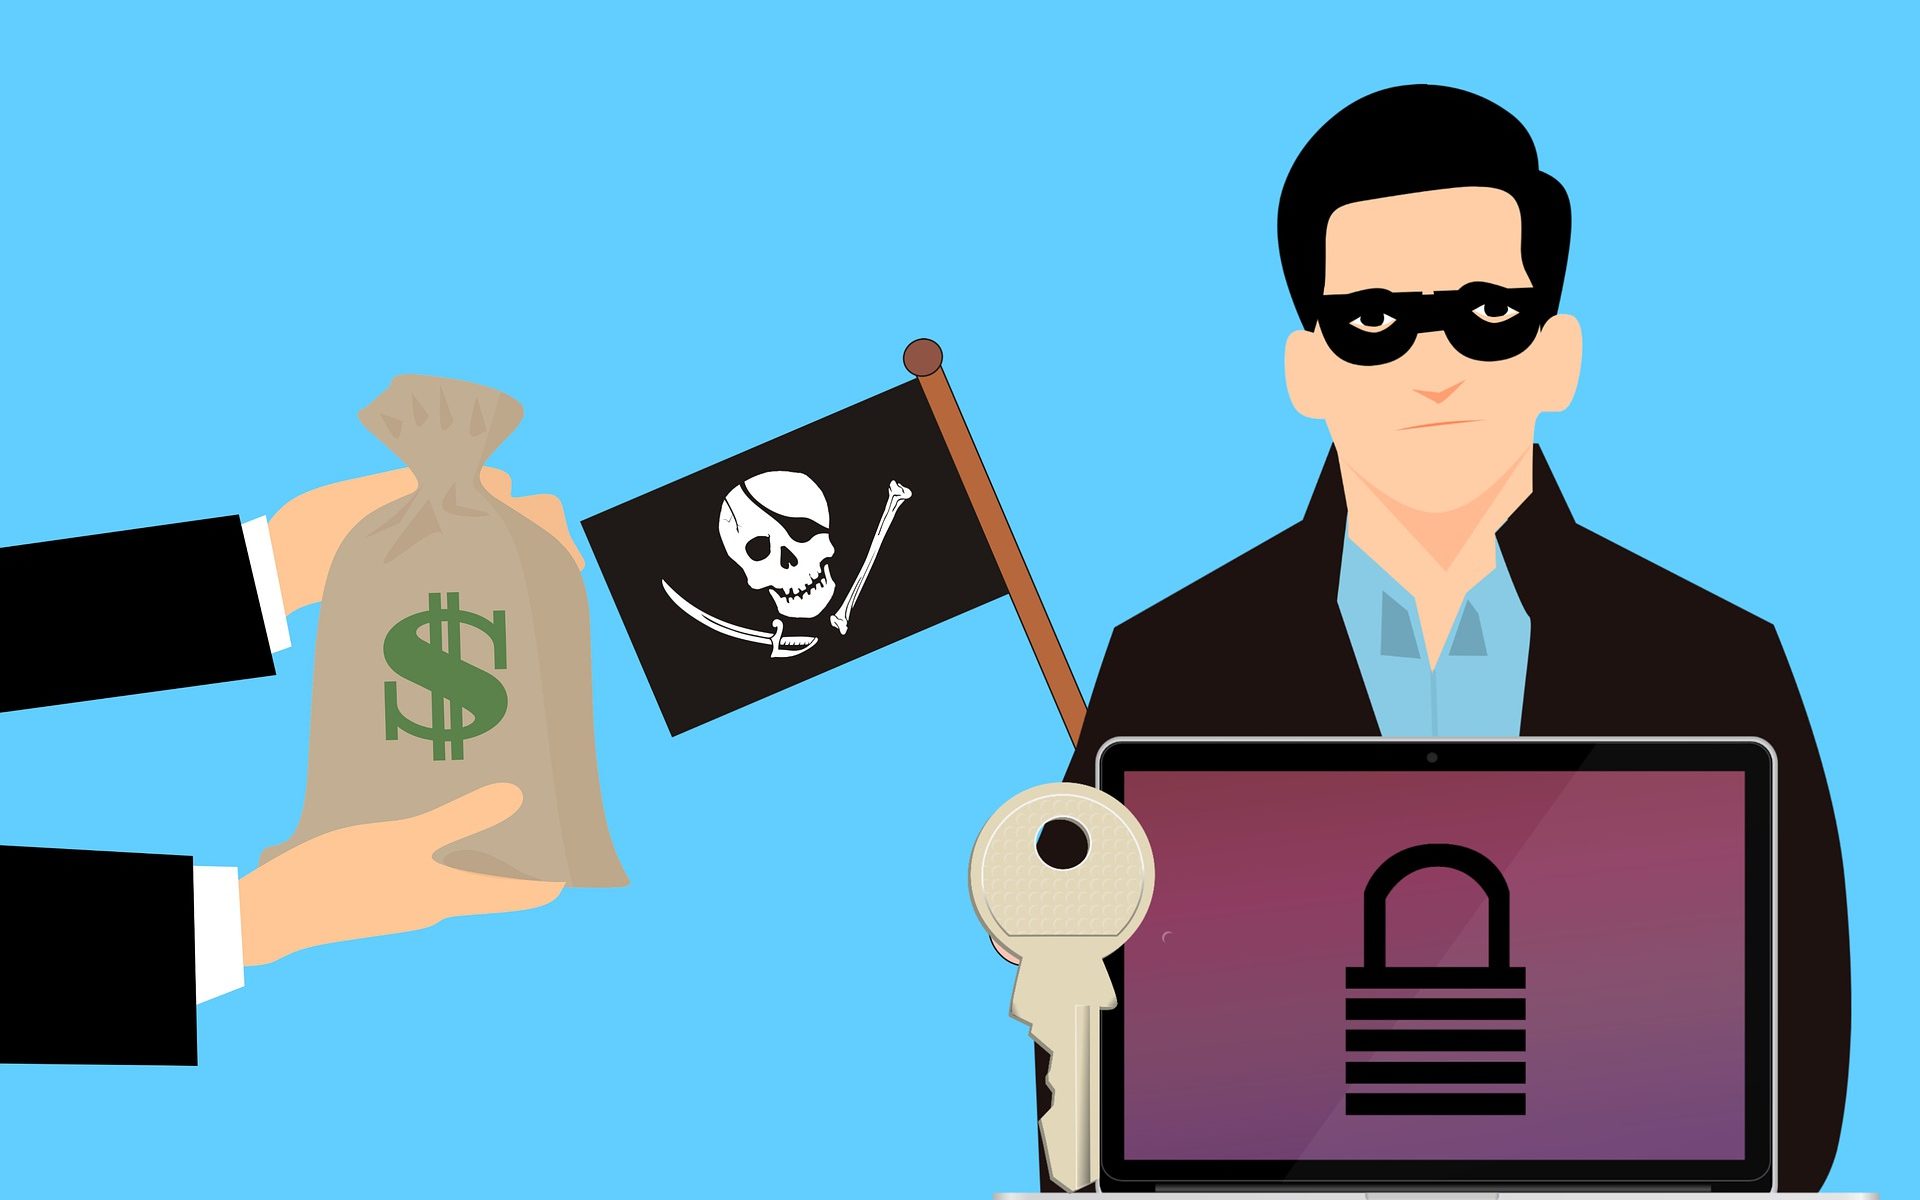 man with a max sitting behind laptop with a key and padlock holding a pirate flag while another man hands him a money bag